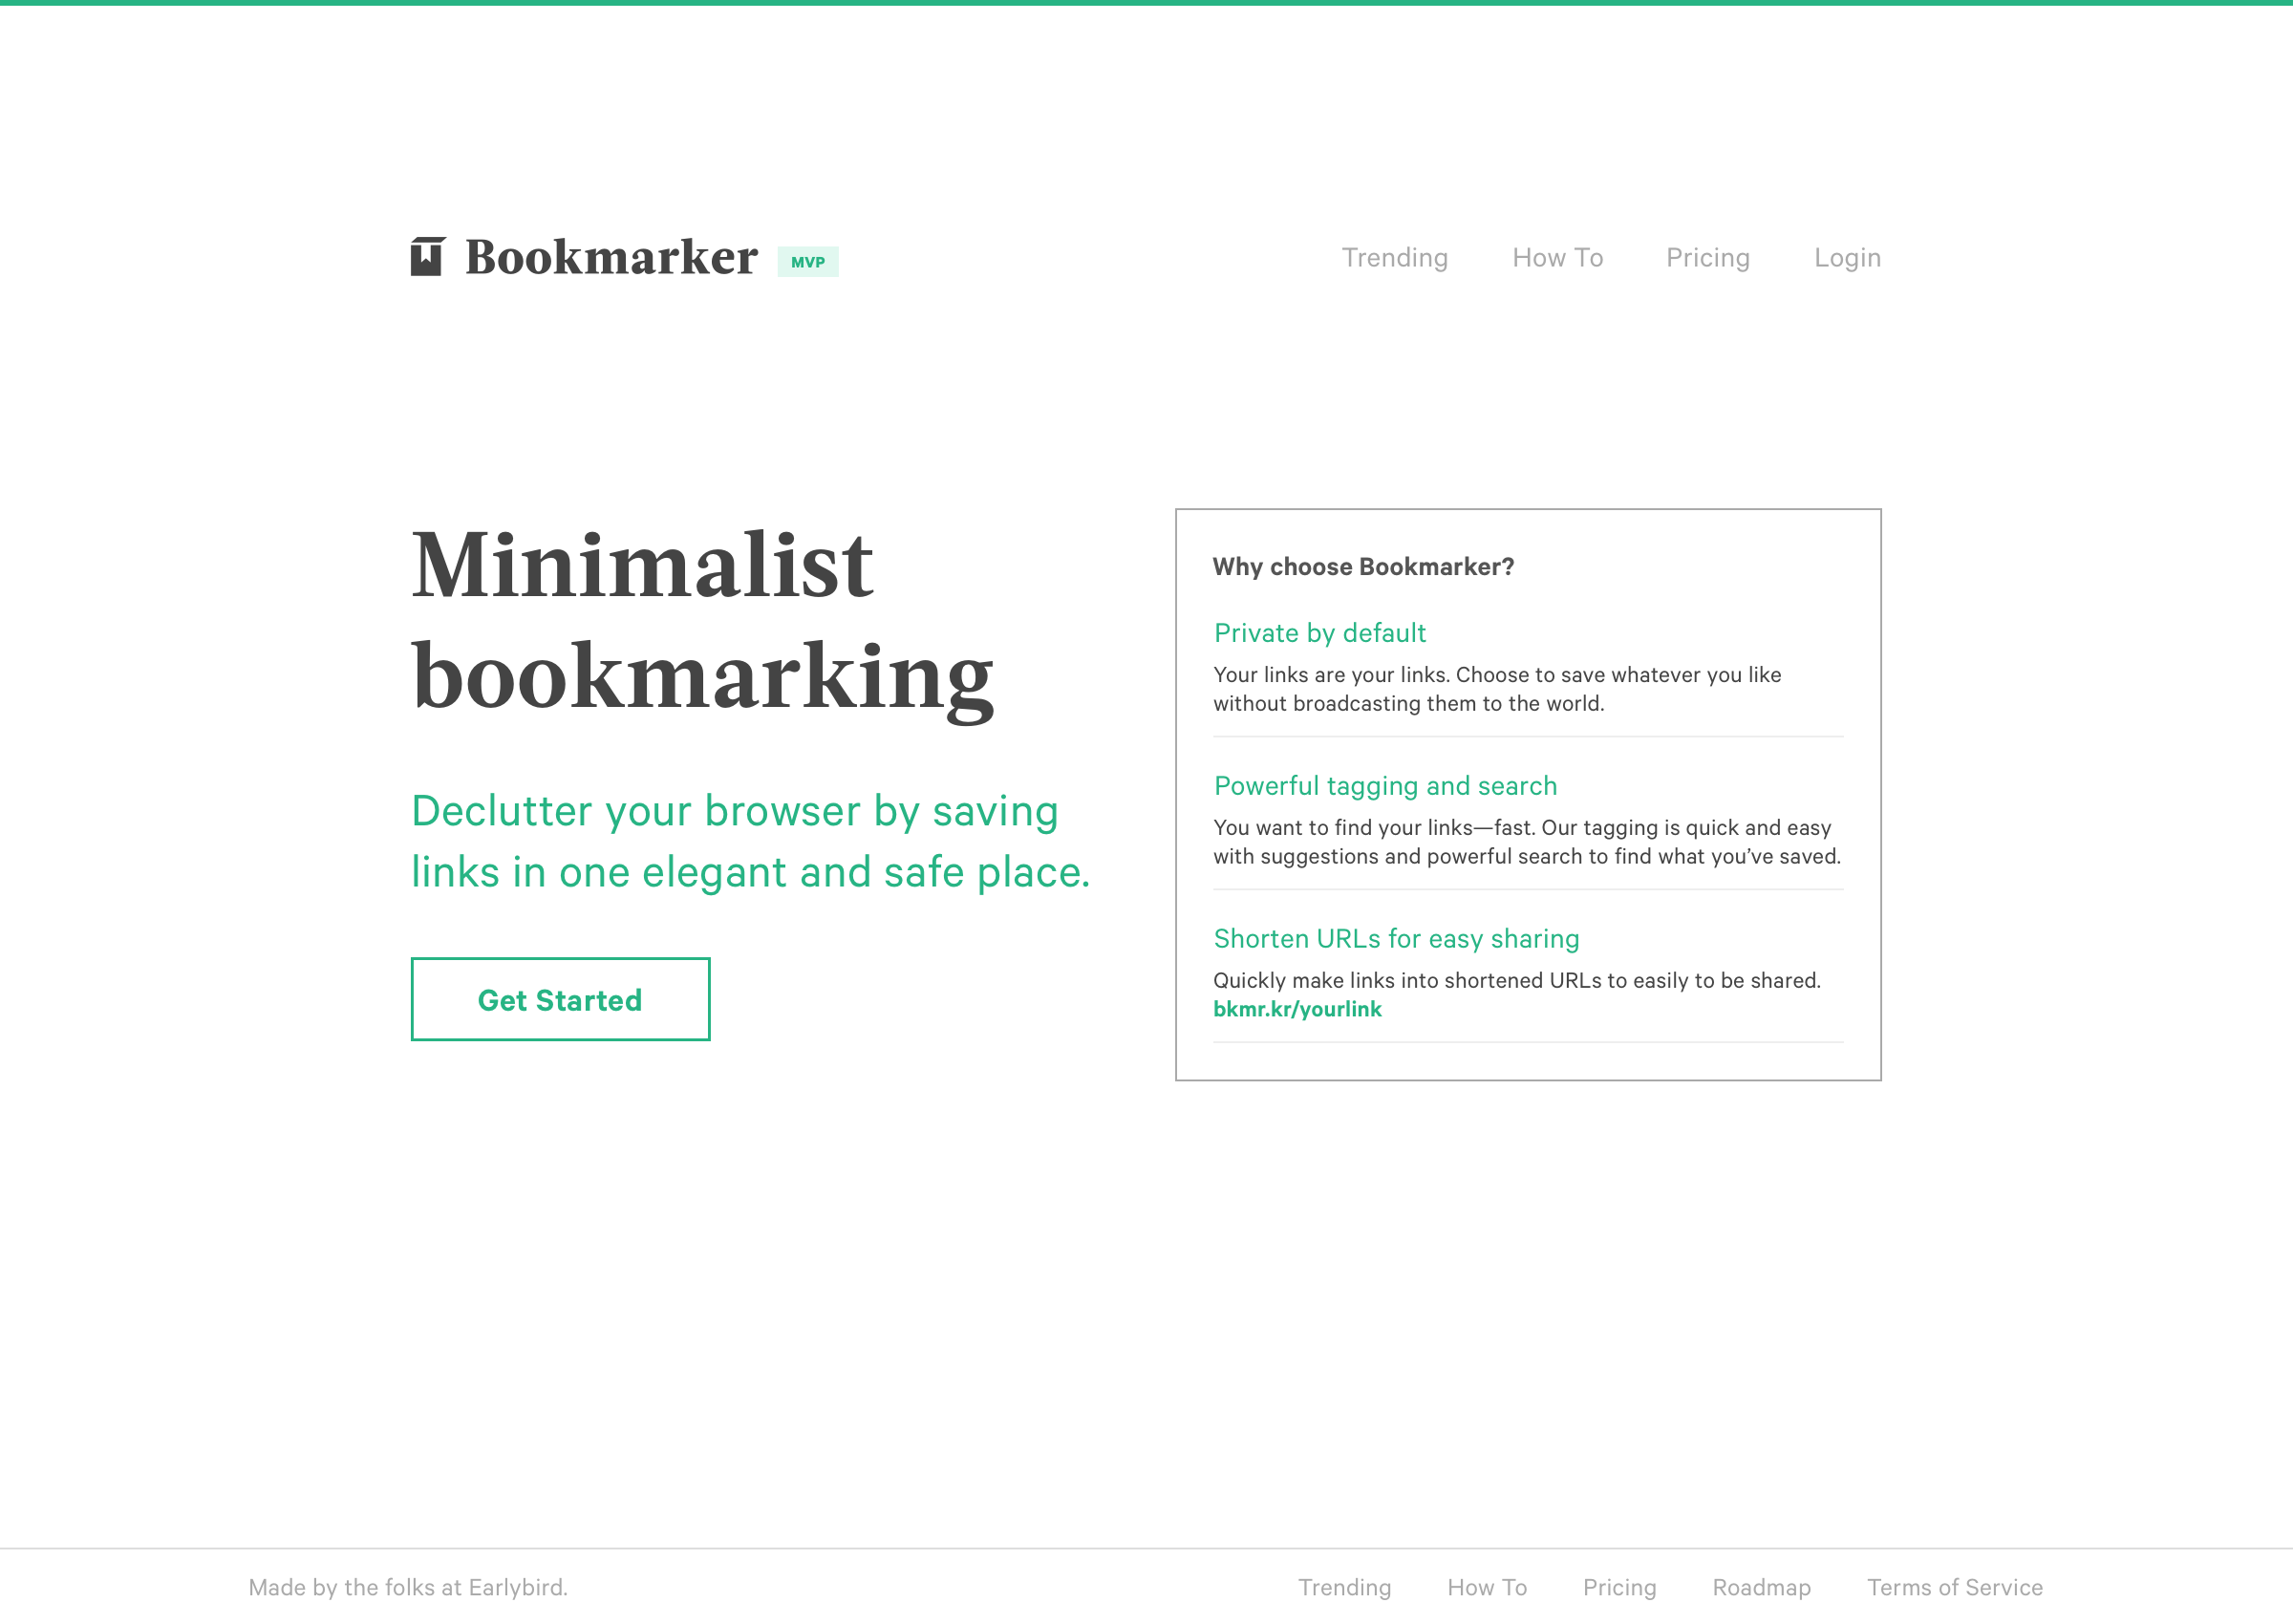 Screenshot of the landing page for Bookmarker